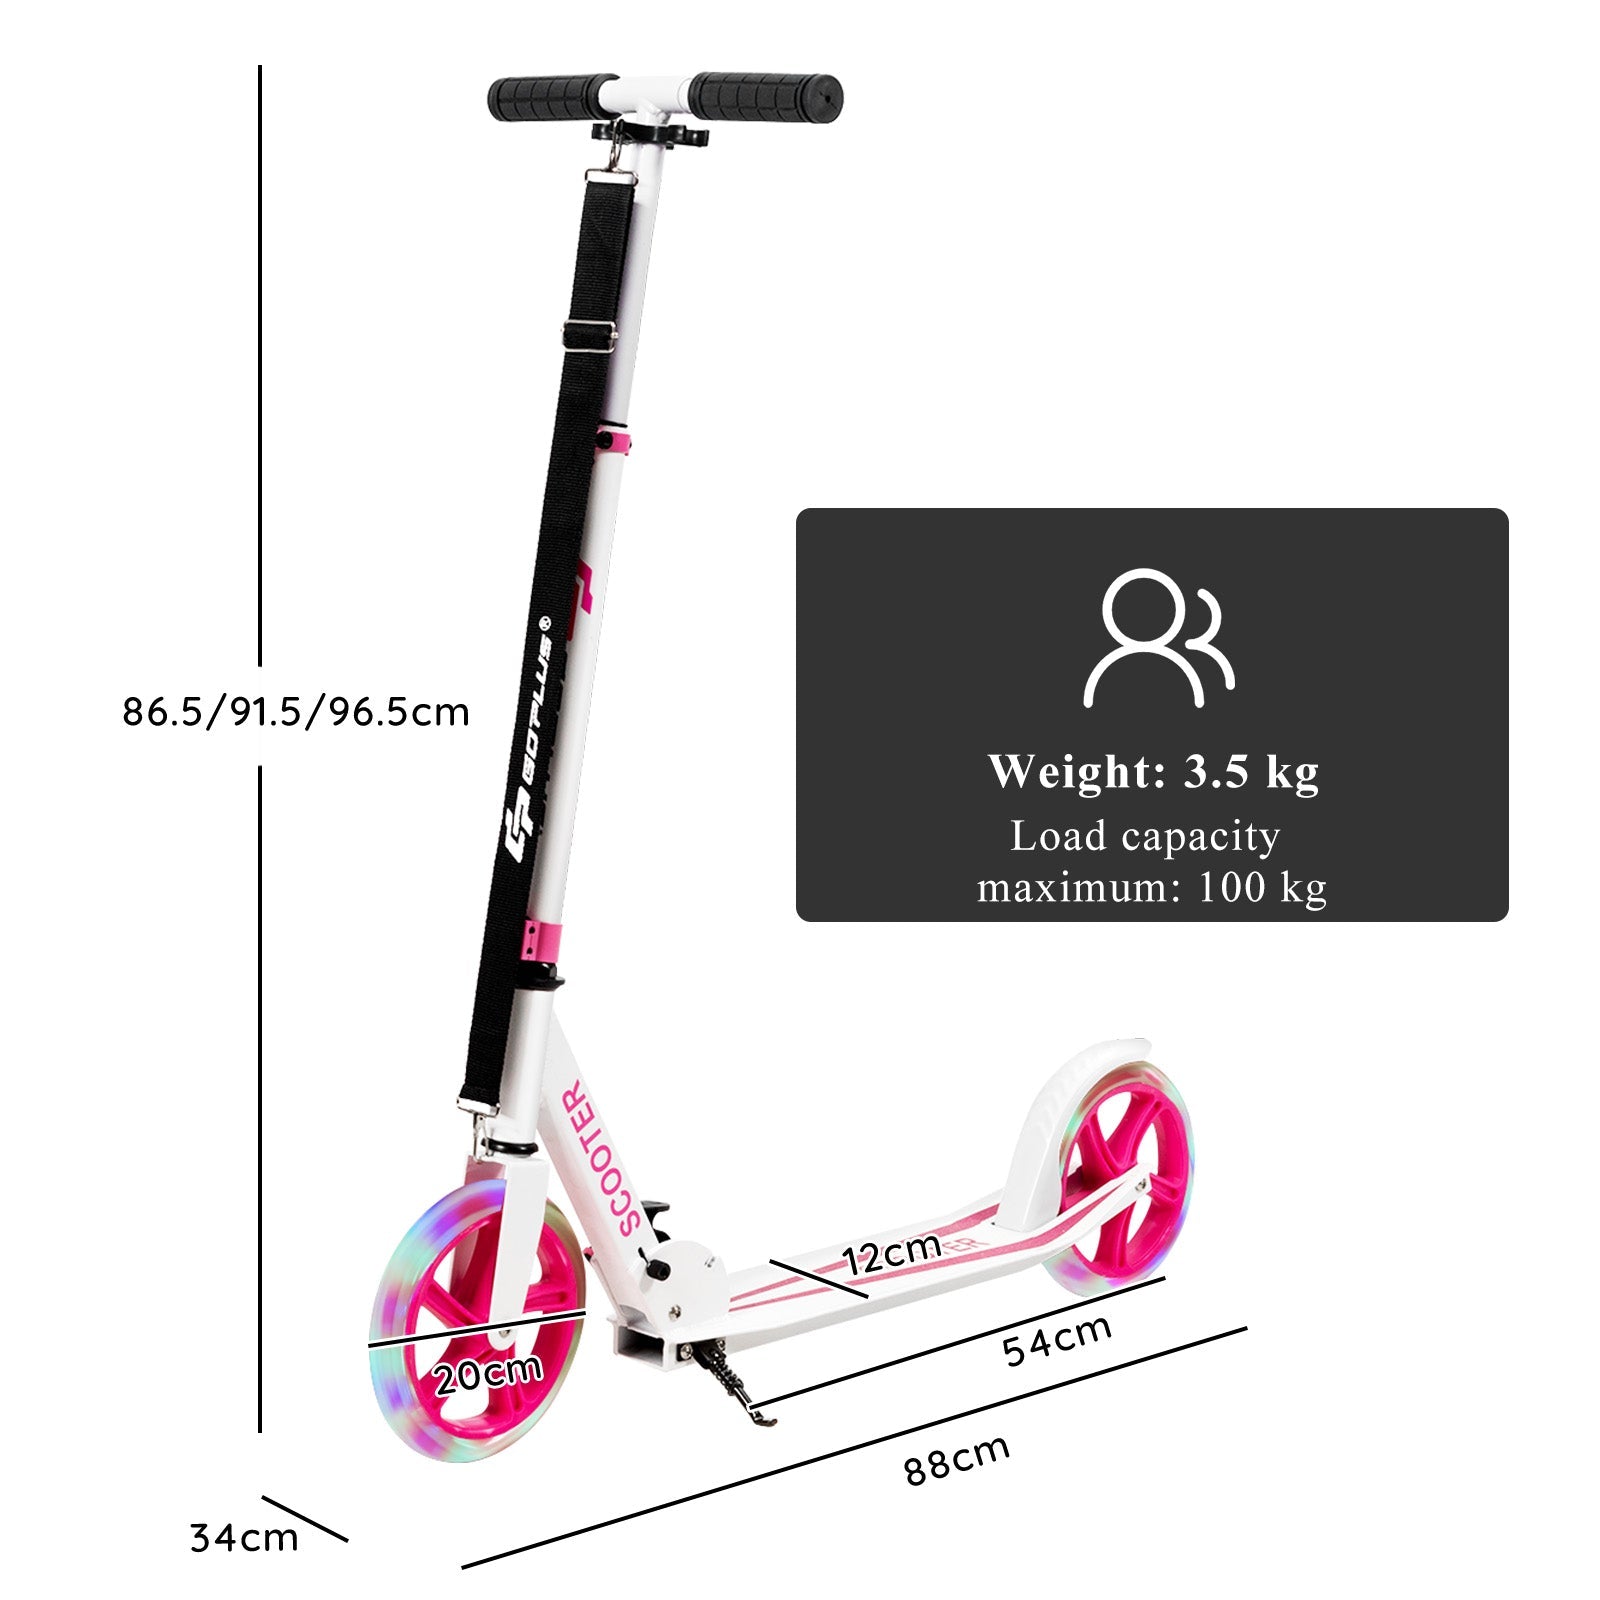 Kick Push Scooter with LED Wheels: Folding Design, Pink Delight